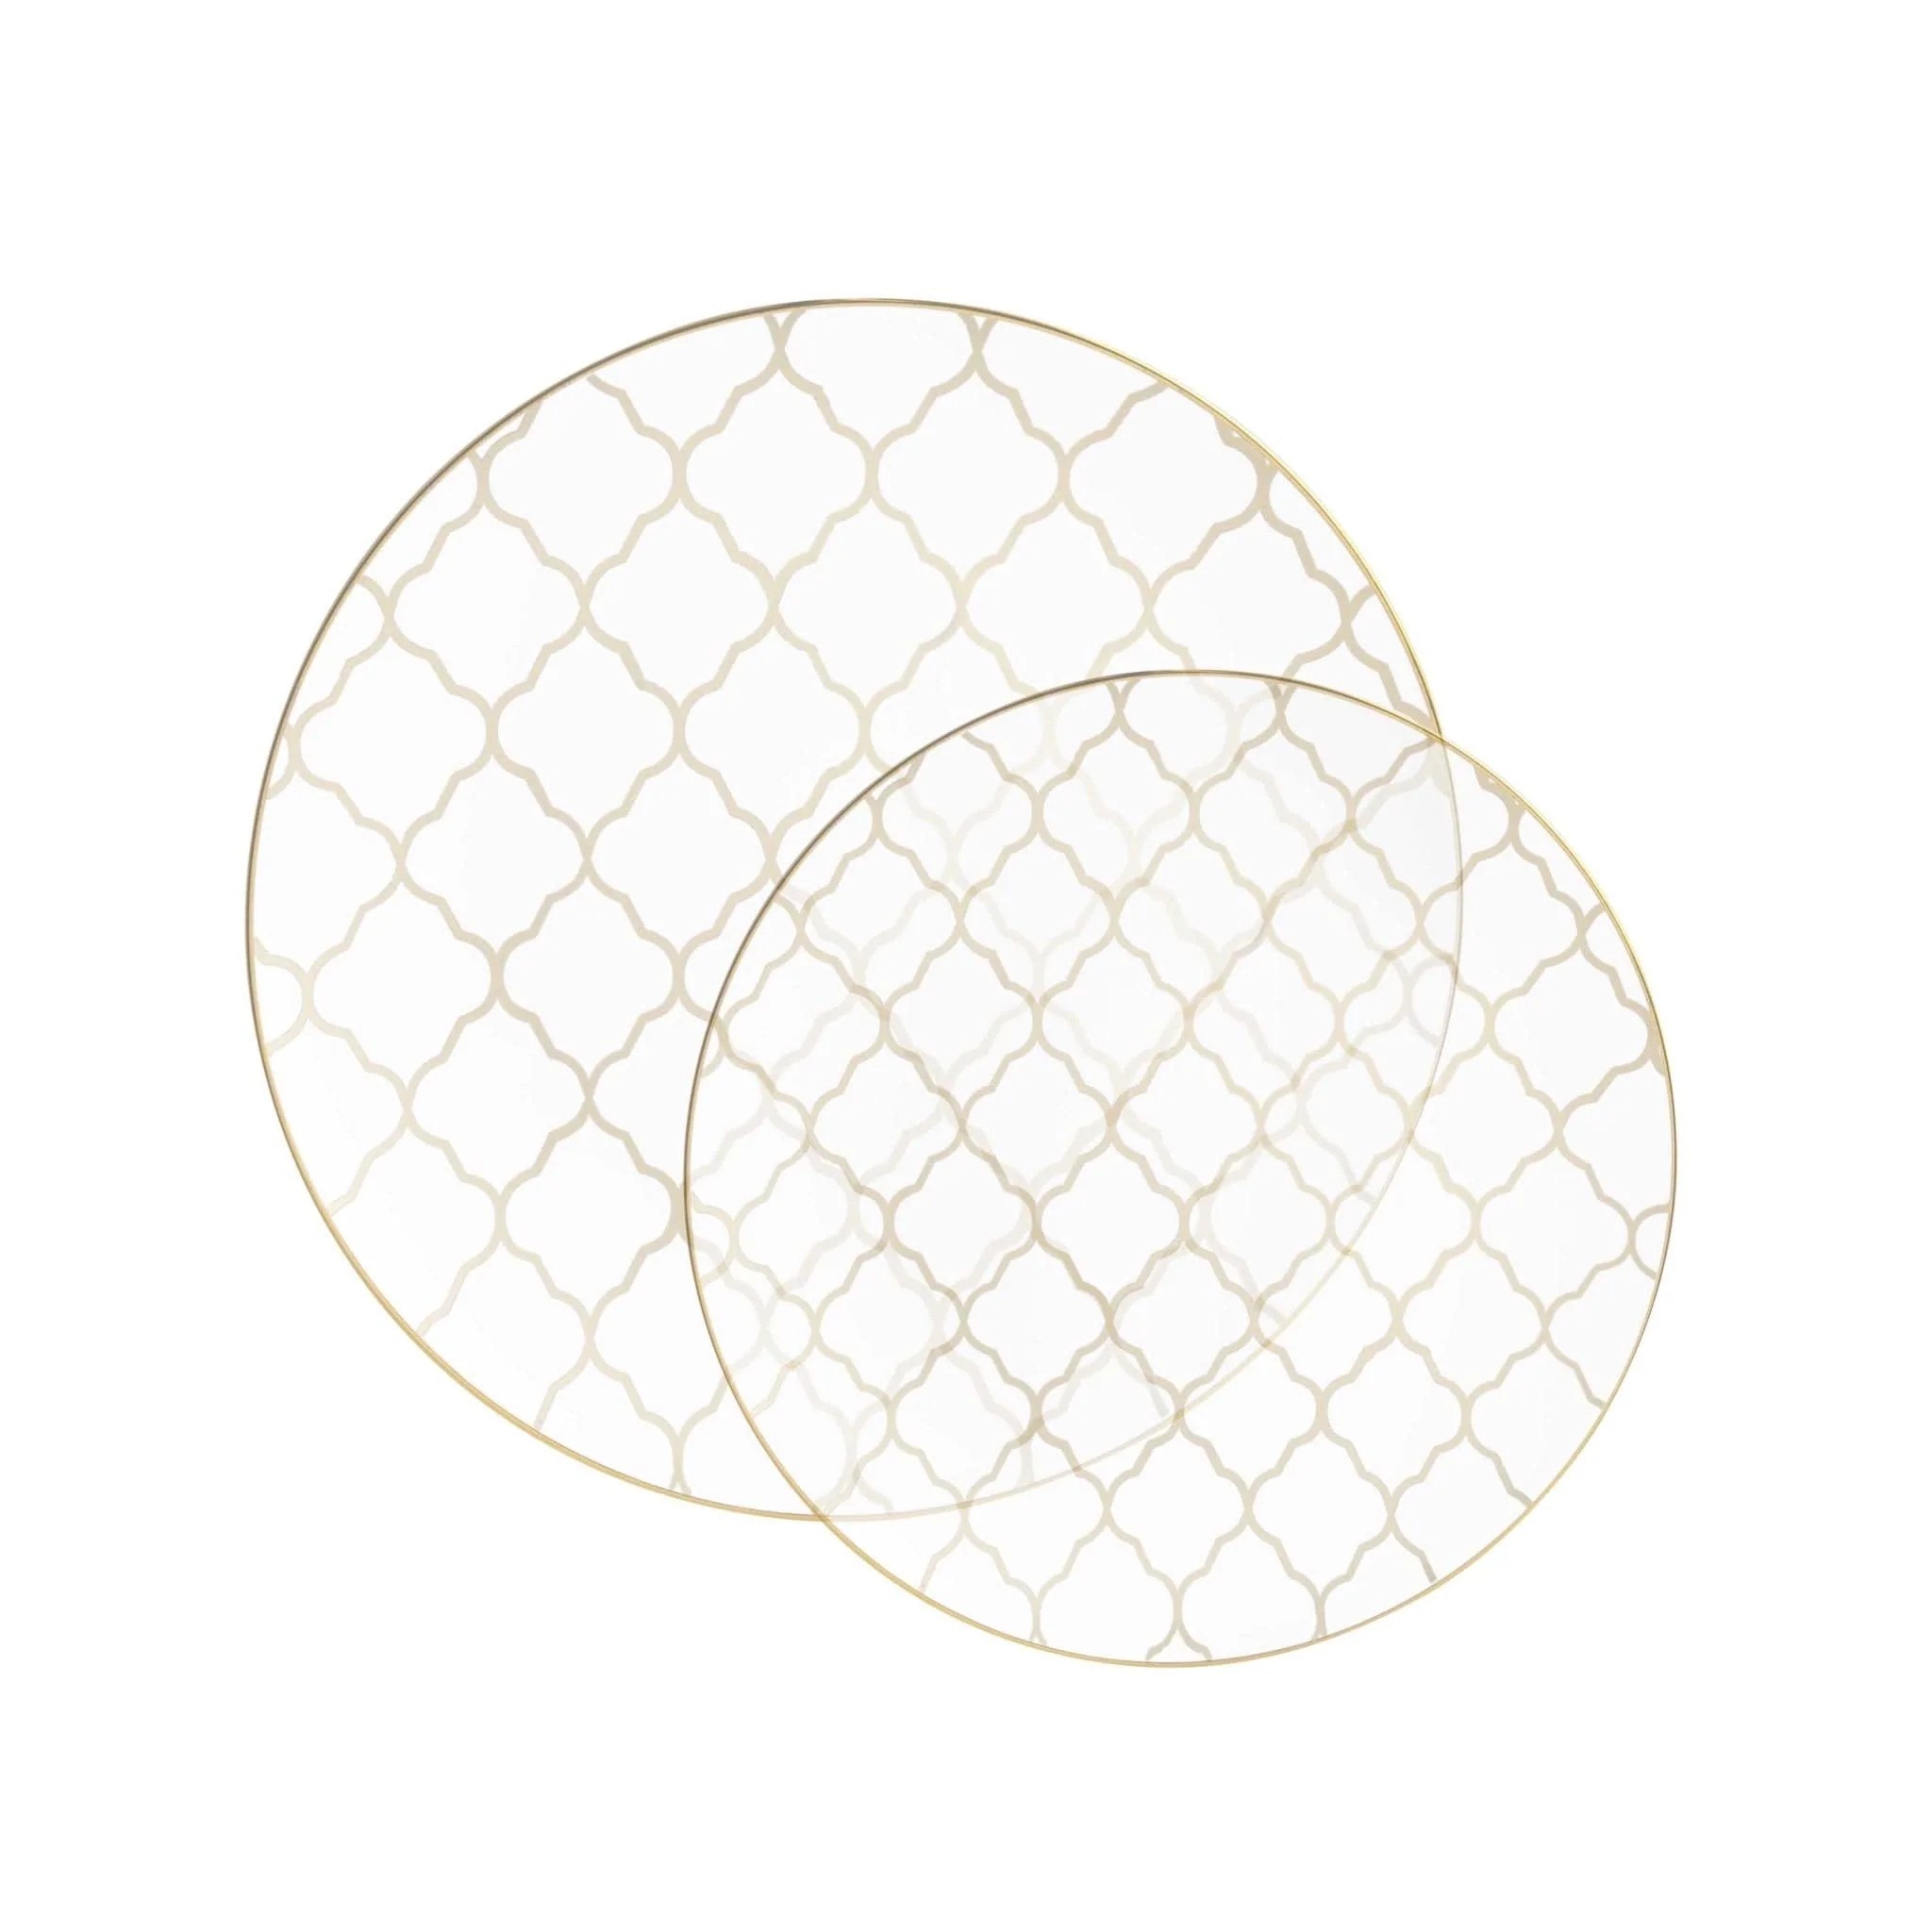 Luxe Party Clear with Gold Lattice Pattern Plastic Dinner Plate 10.25